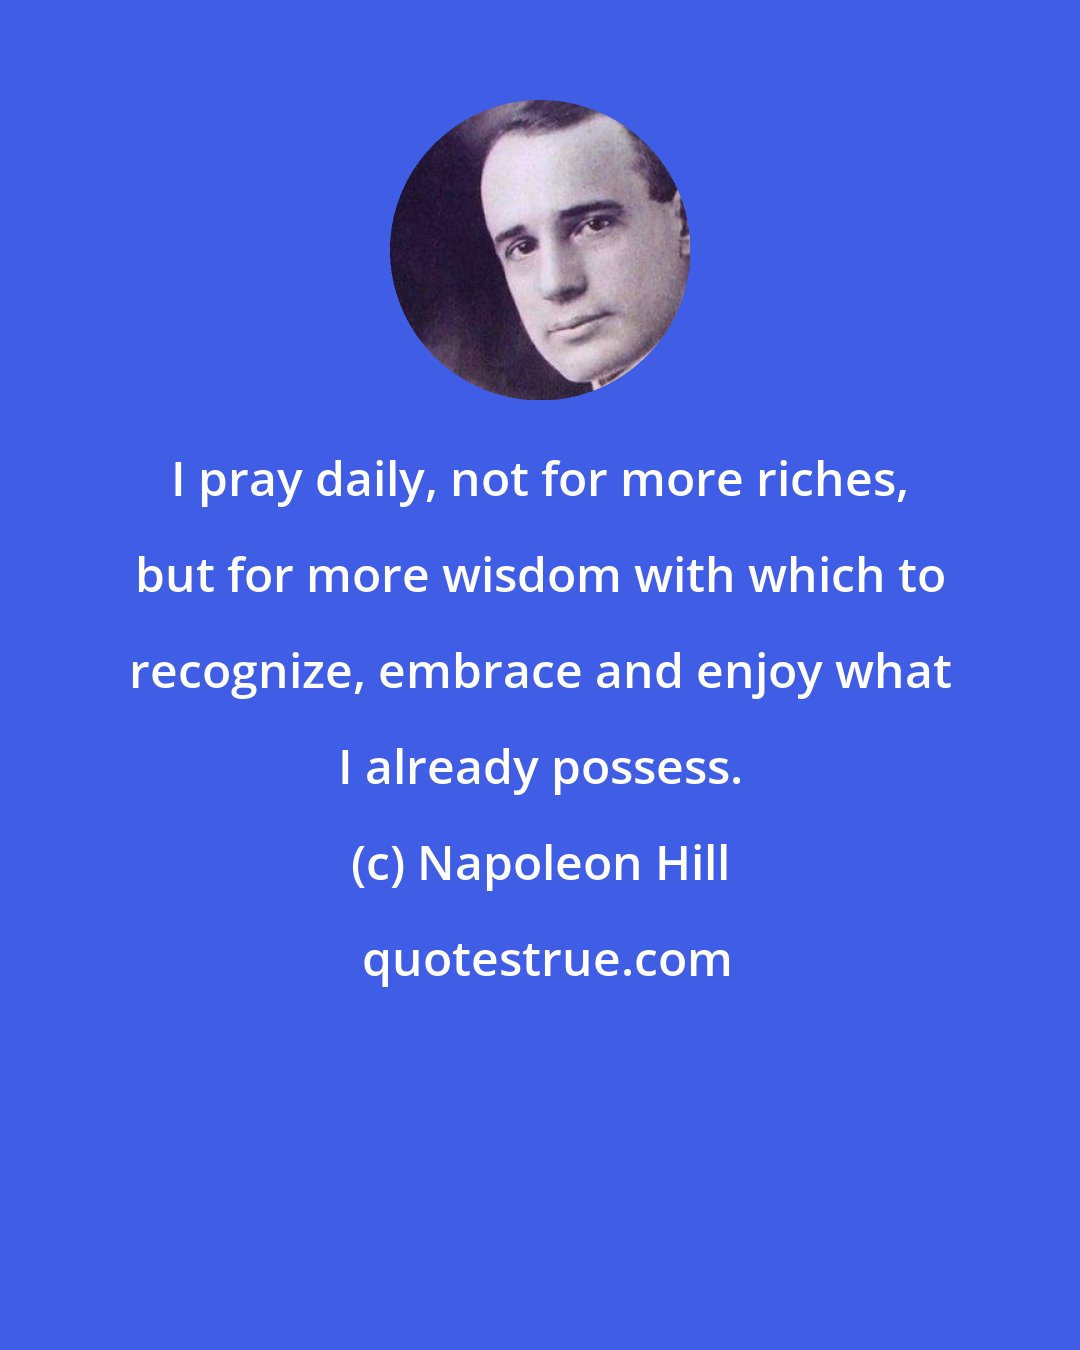 Napoleon Hill: I pray daily, not for more riches, but for more wisdom with which to recognize, embrace and enjoy what I already possess.